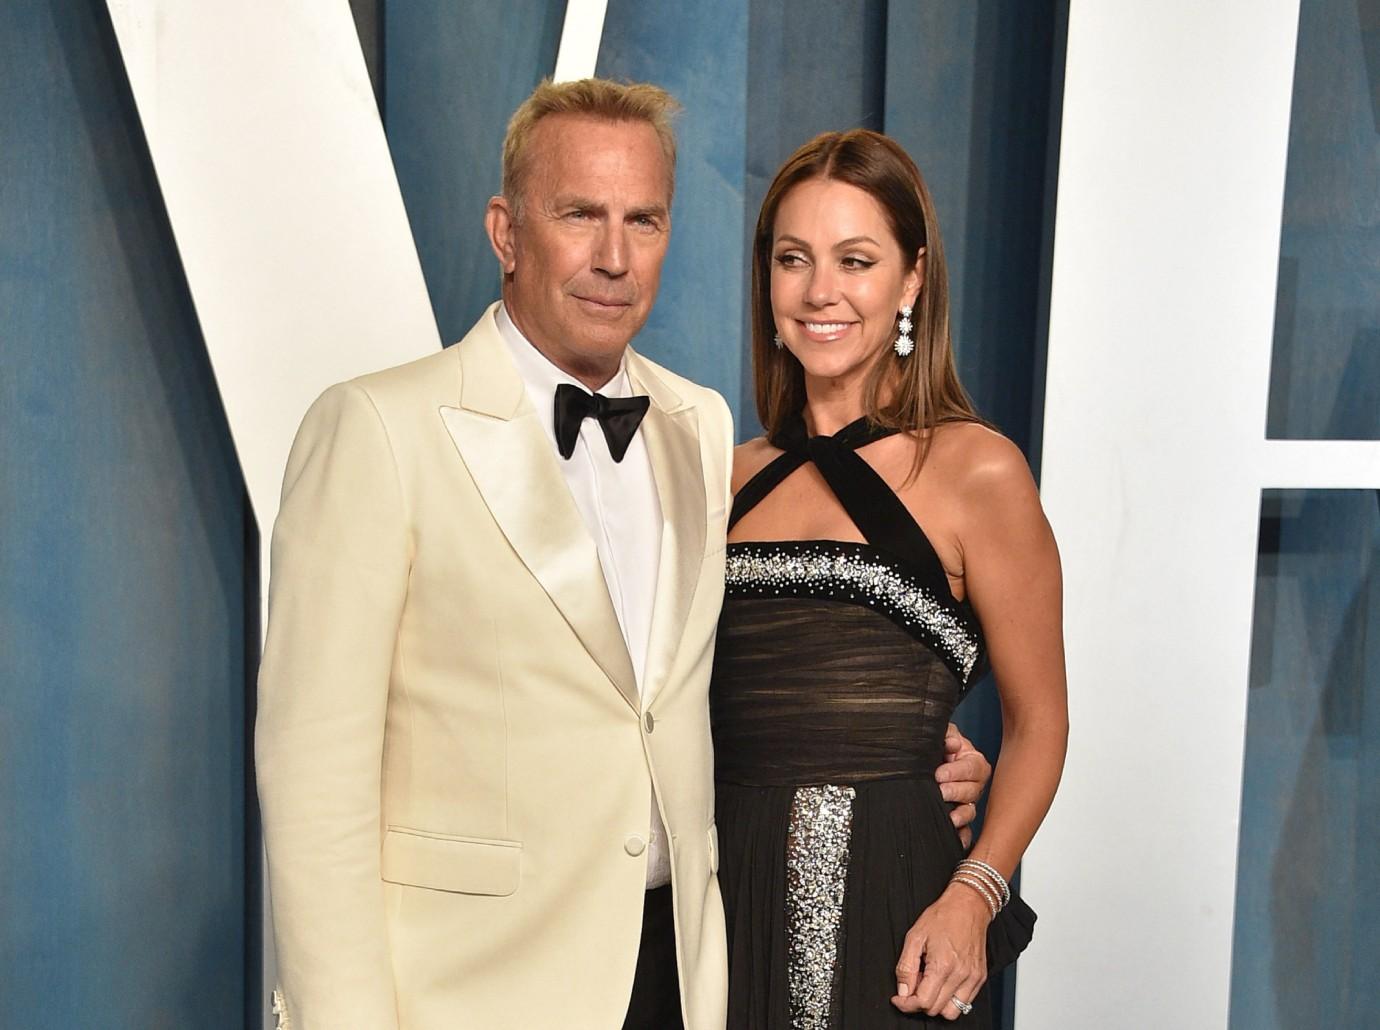 Kevin Costner's estranged wife ditches wedding ring amid divorce